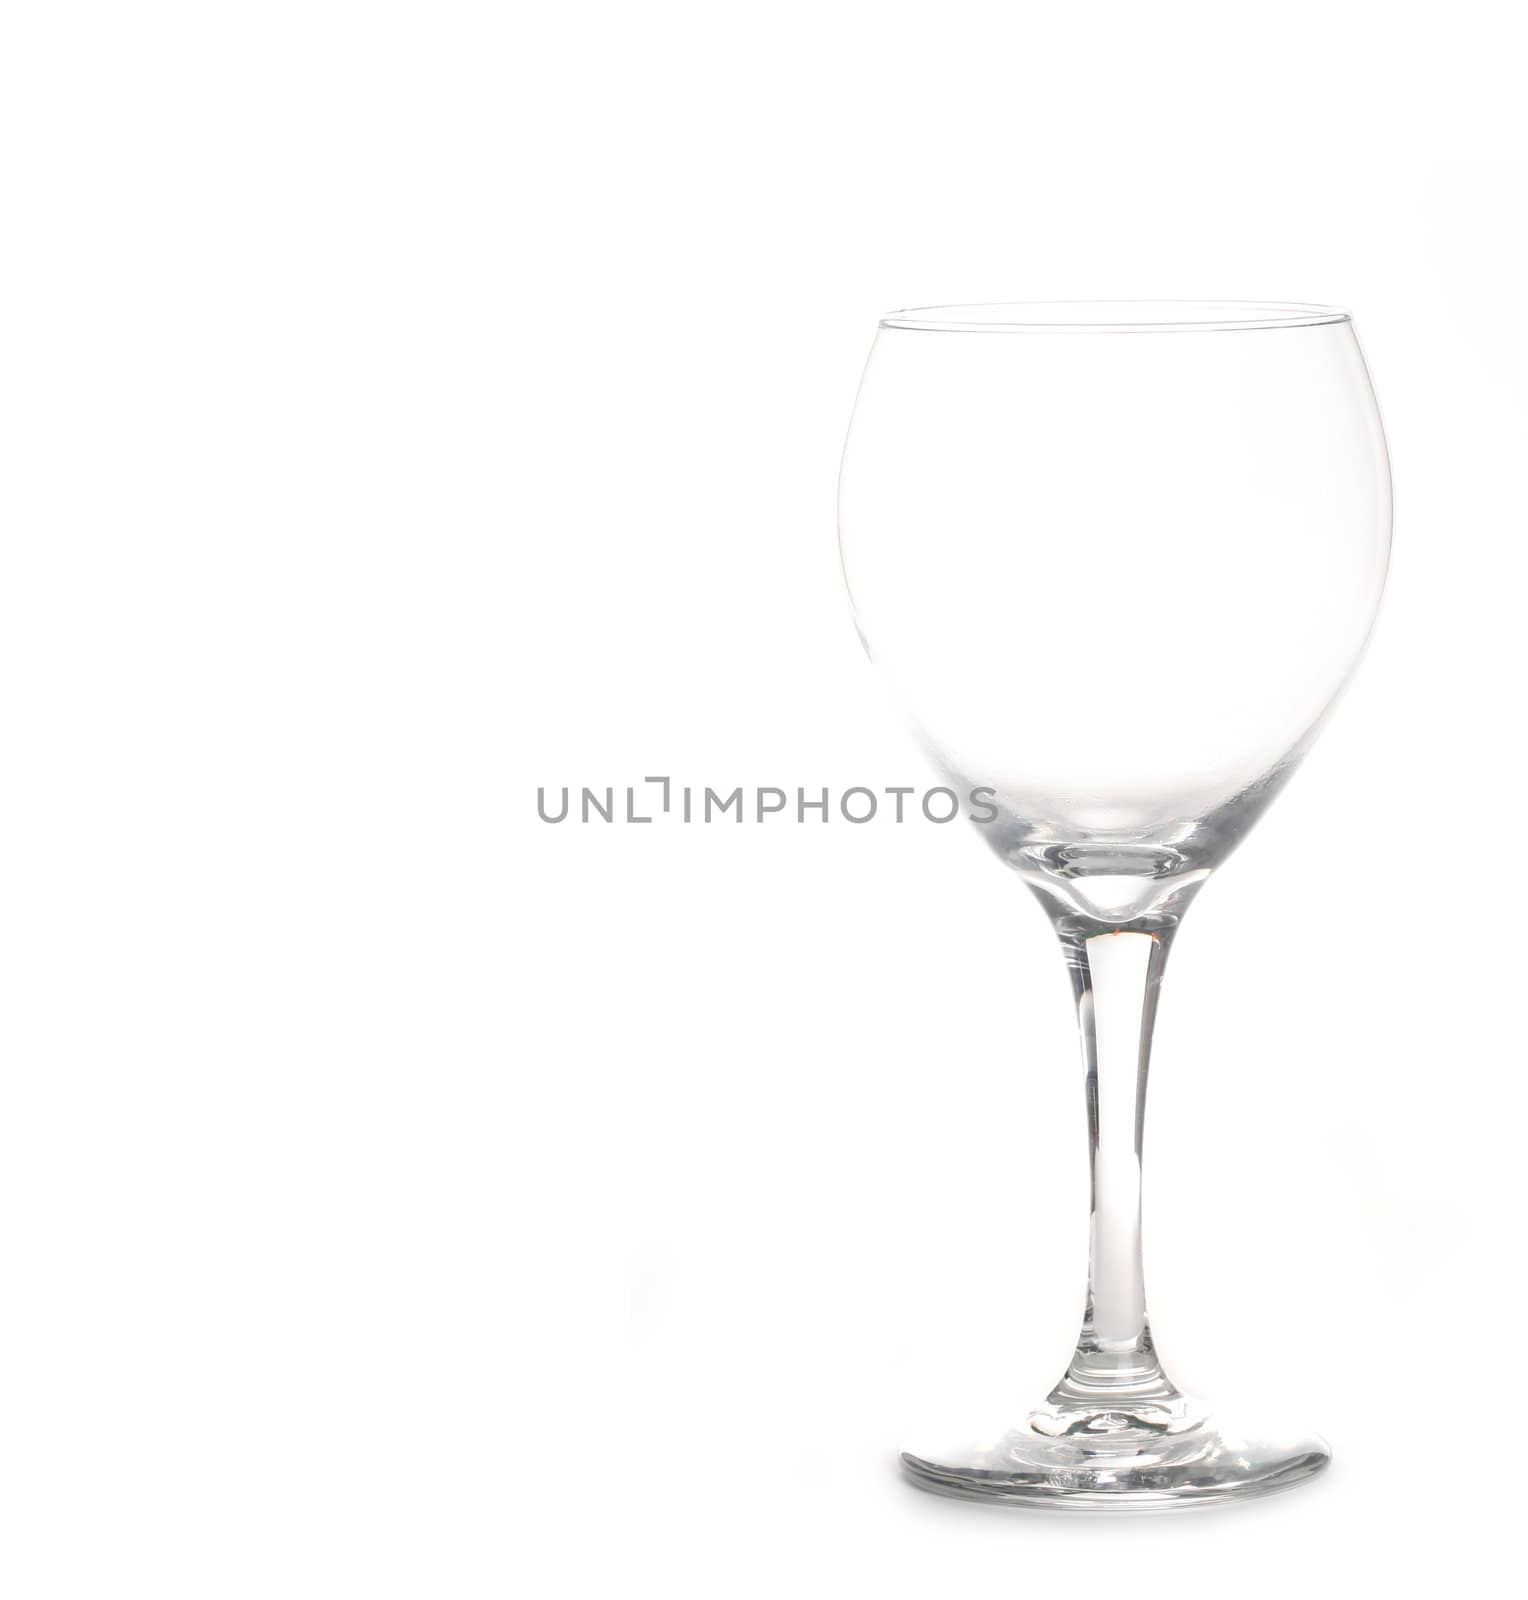 Empty Clear WIne Glass Isolated on White With Copy Space for Your Text